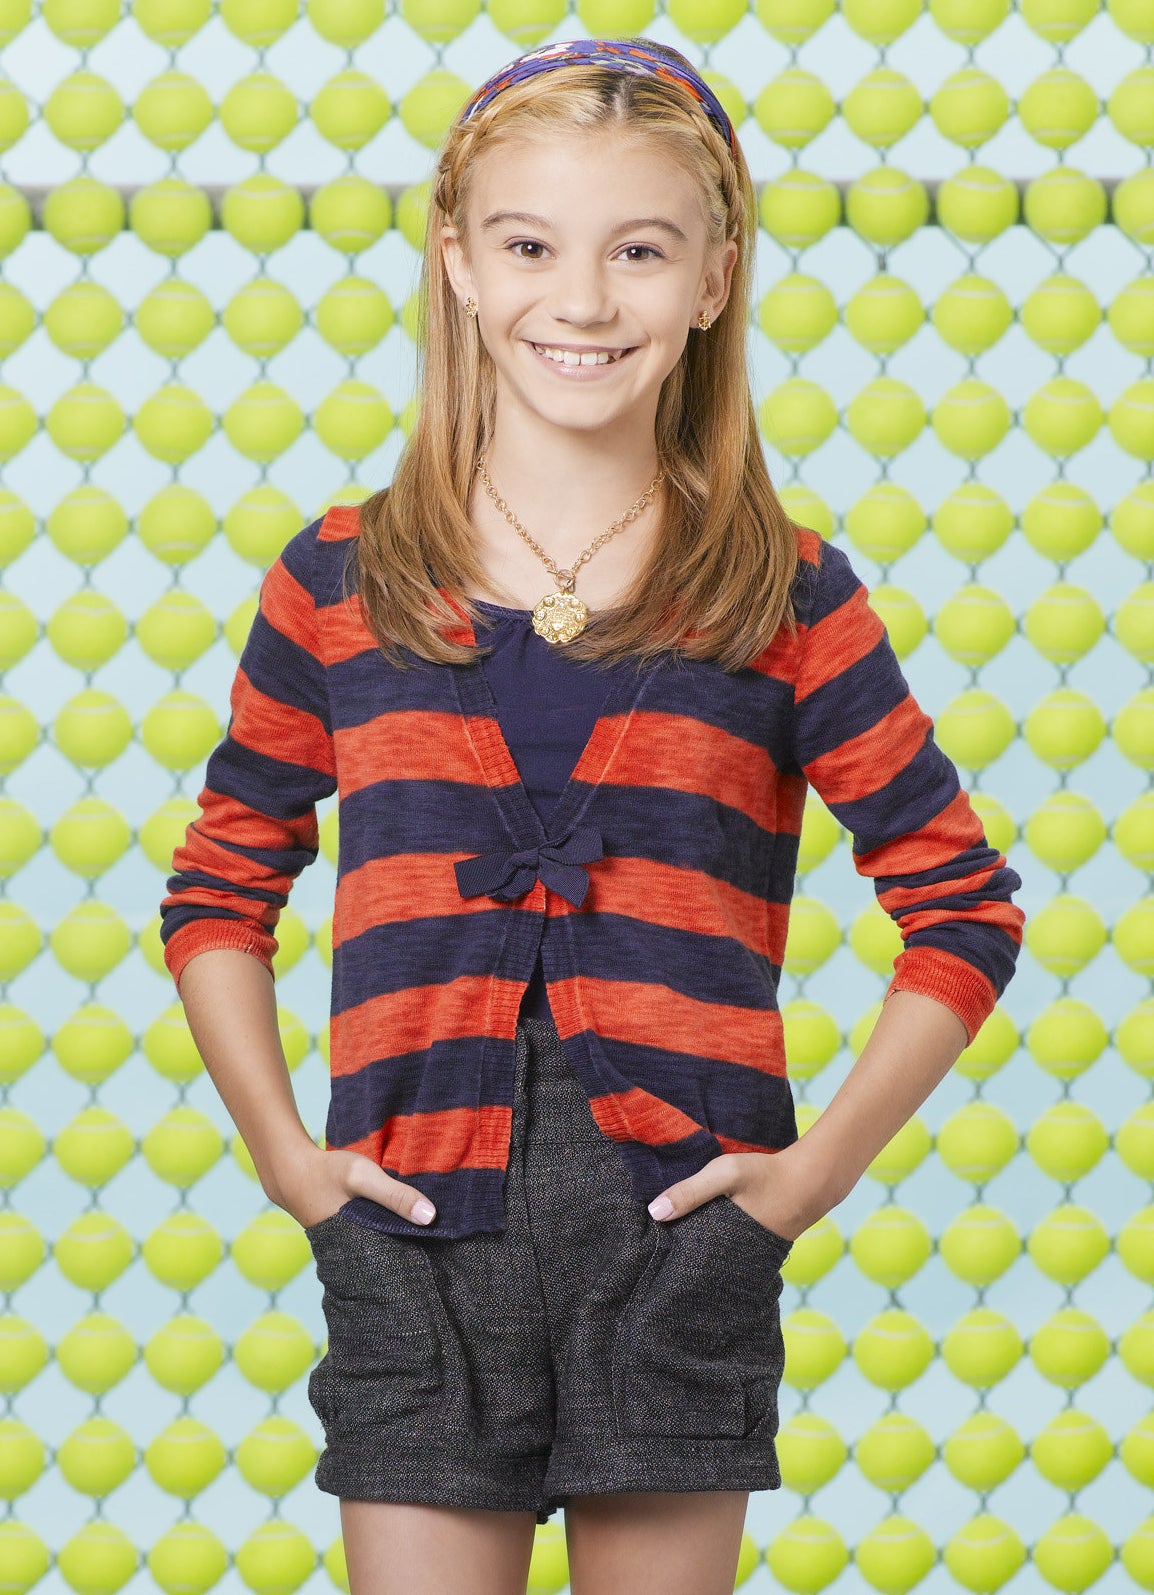 Hannelius as Avery Jennings in Dog With a Blog. 